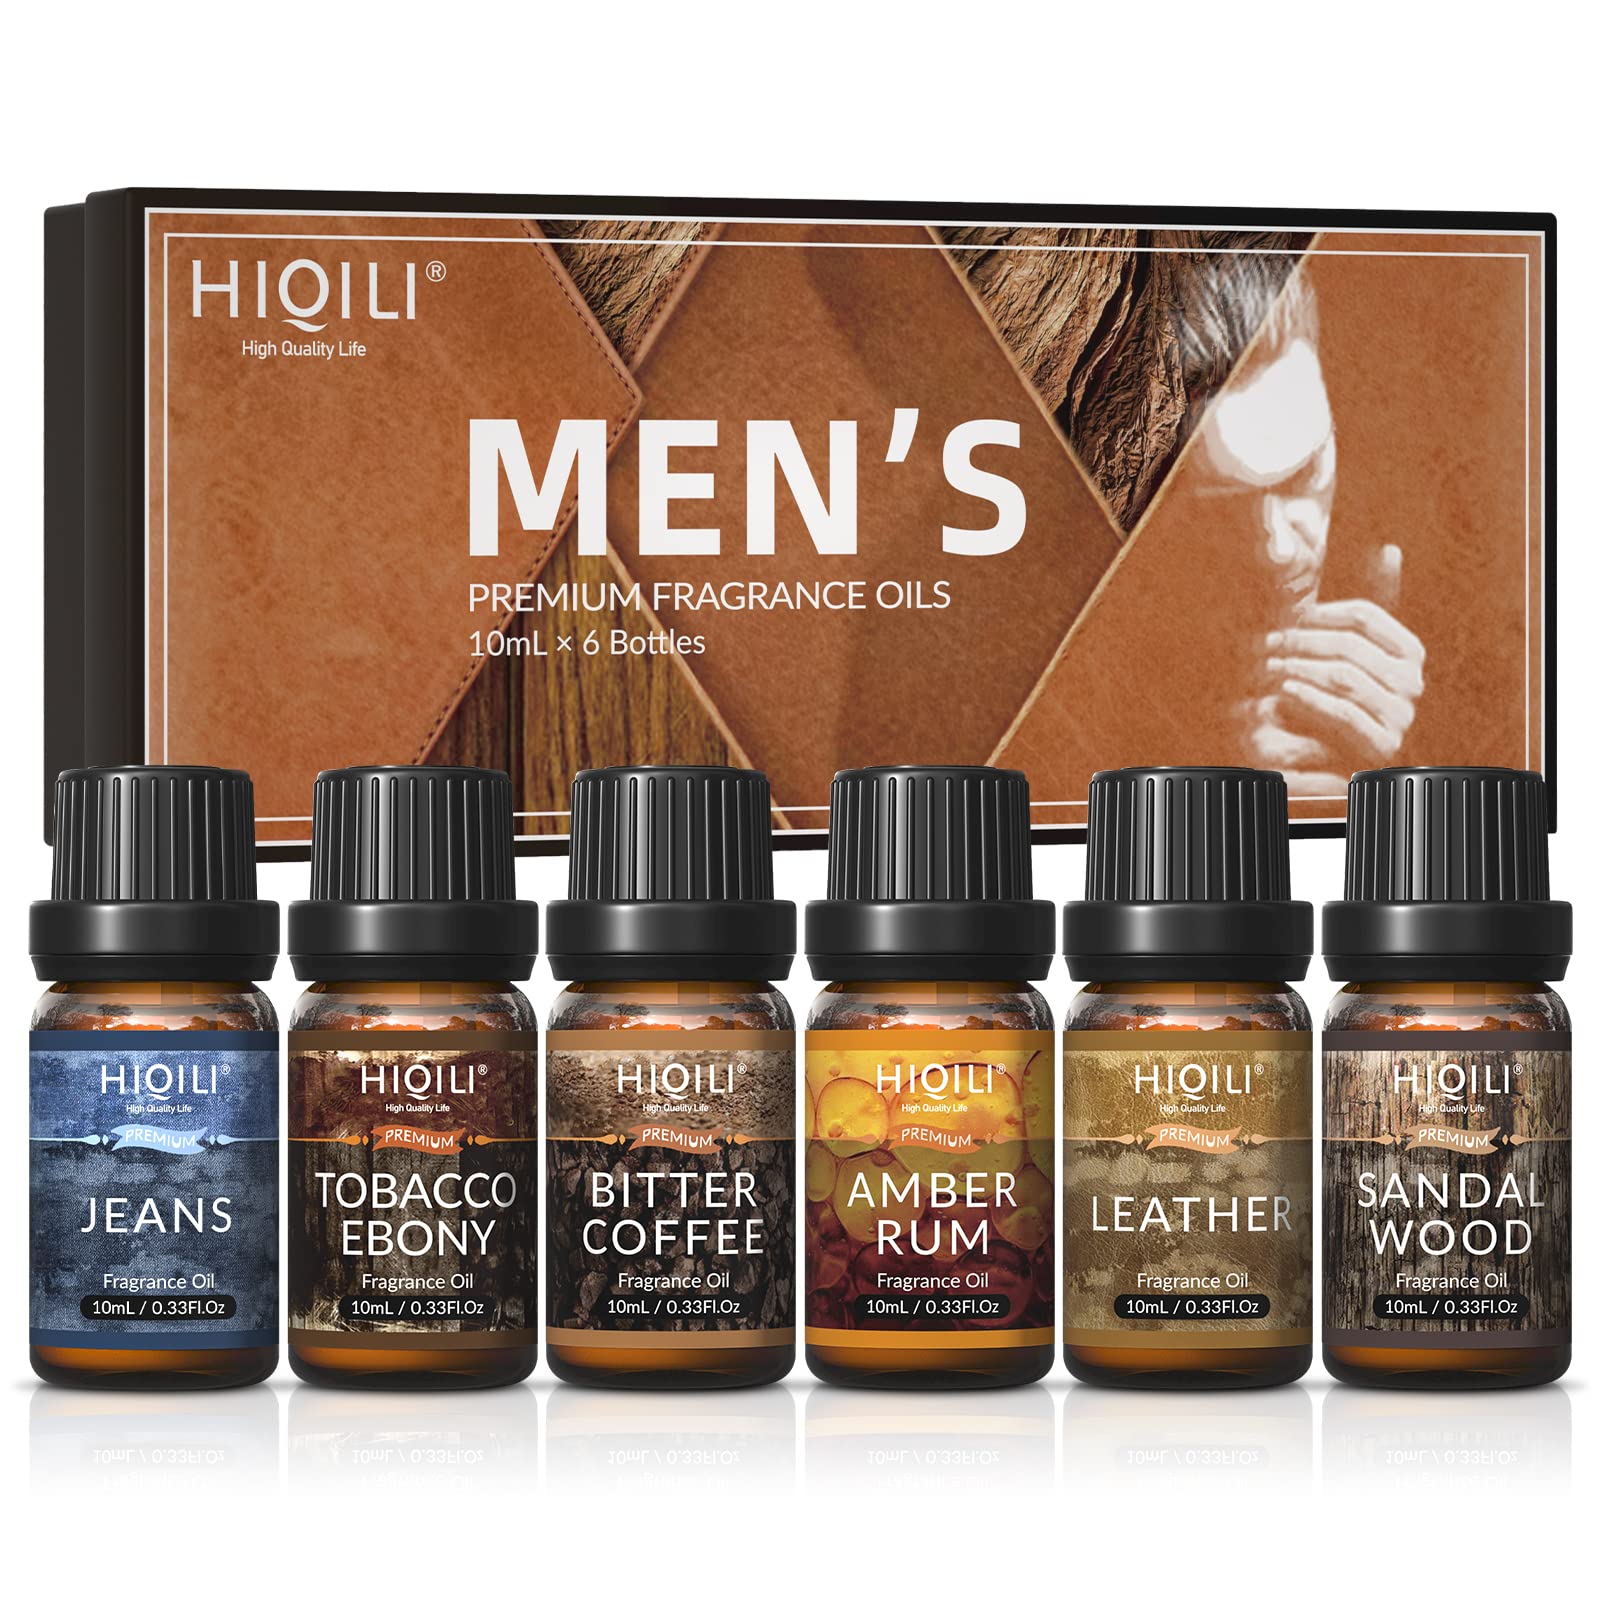 HIQILI Fragrance Oils for Men, Set of 6 Aomatherapy Scented  Oils-Sandalwood, Leather, Coffee, Jeans, Tobacco